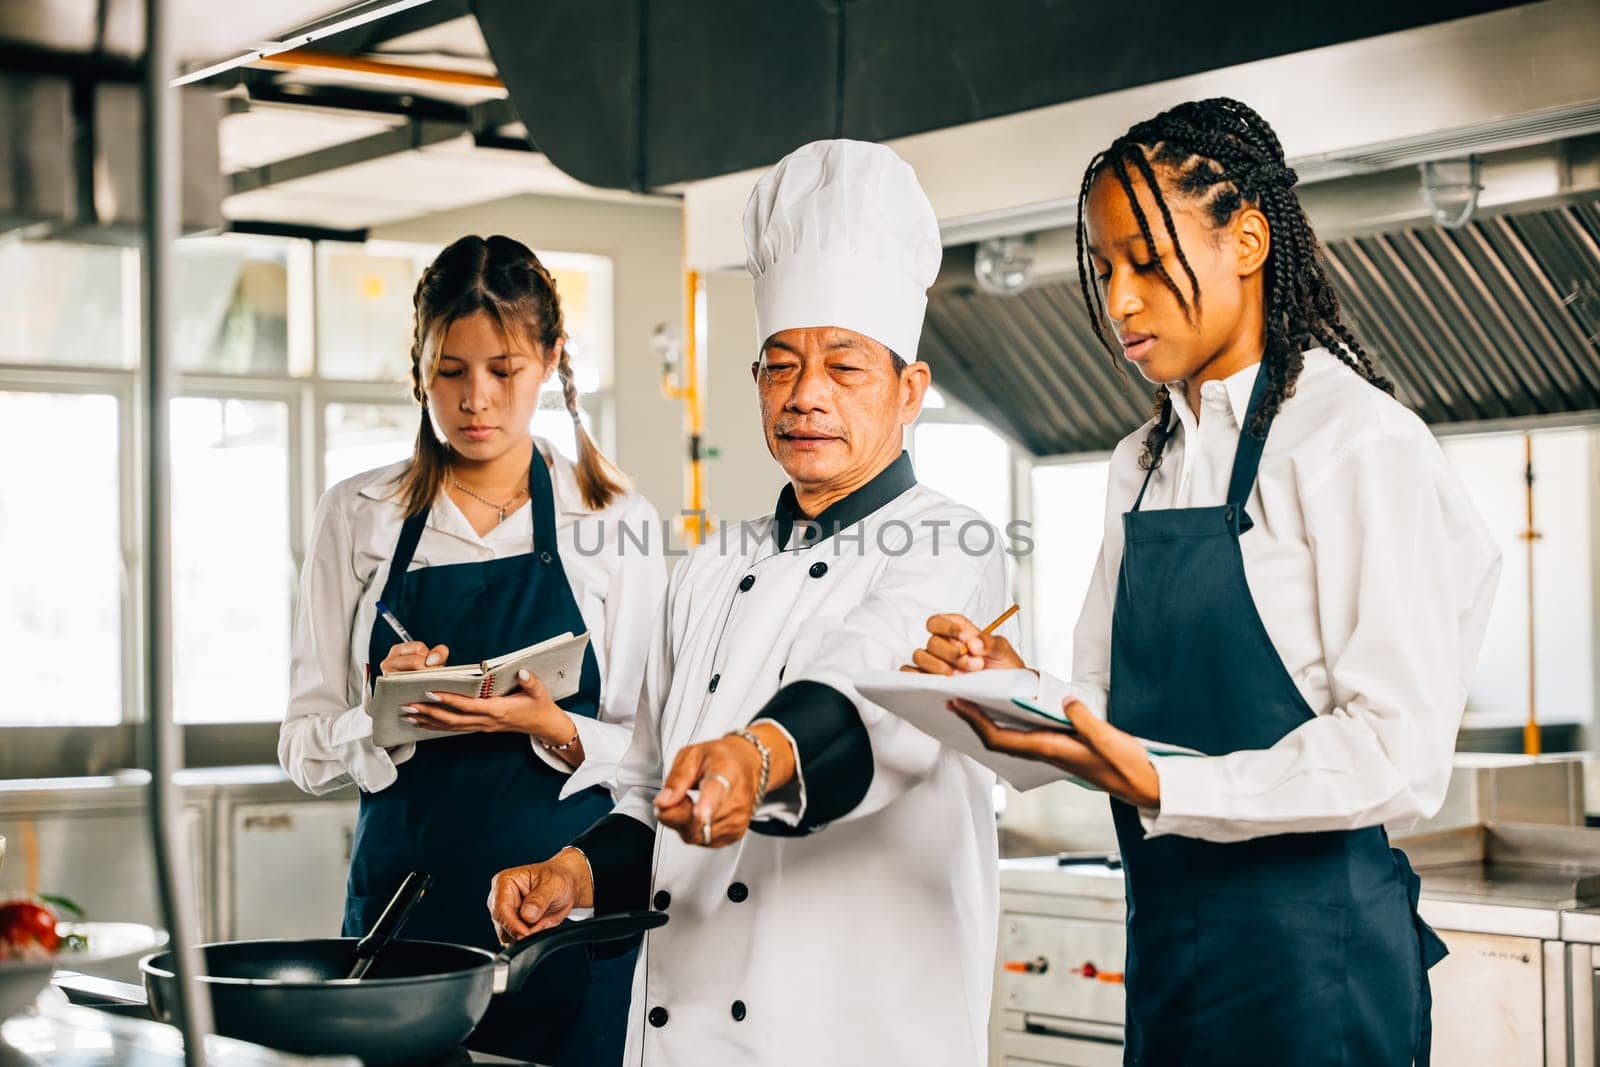 Asian senior chef in uniform teaches cooking techniques to multiracial students. Emphasizing teamwork learning and note-taking in this professional kitchen workshop. Food Edocation by Sorapop